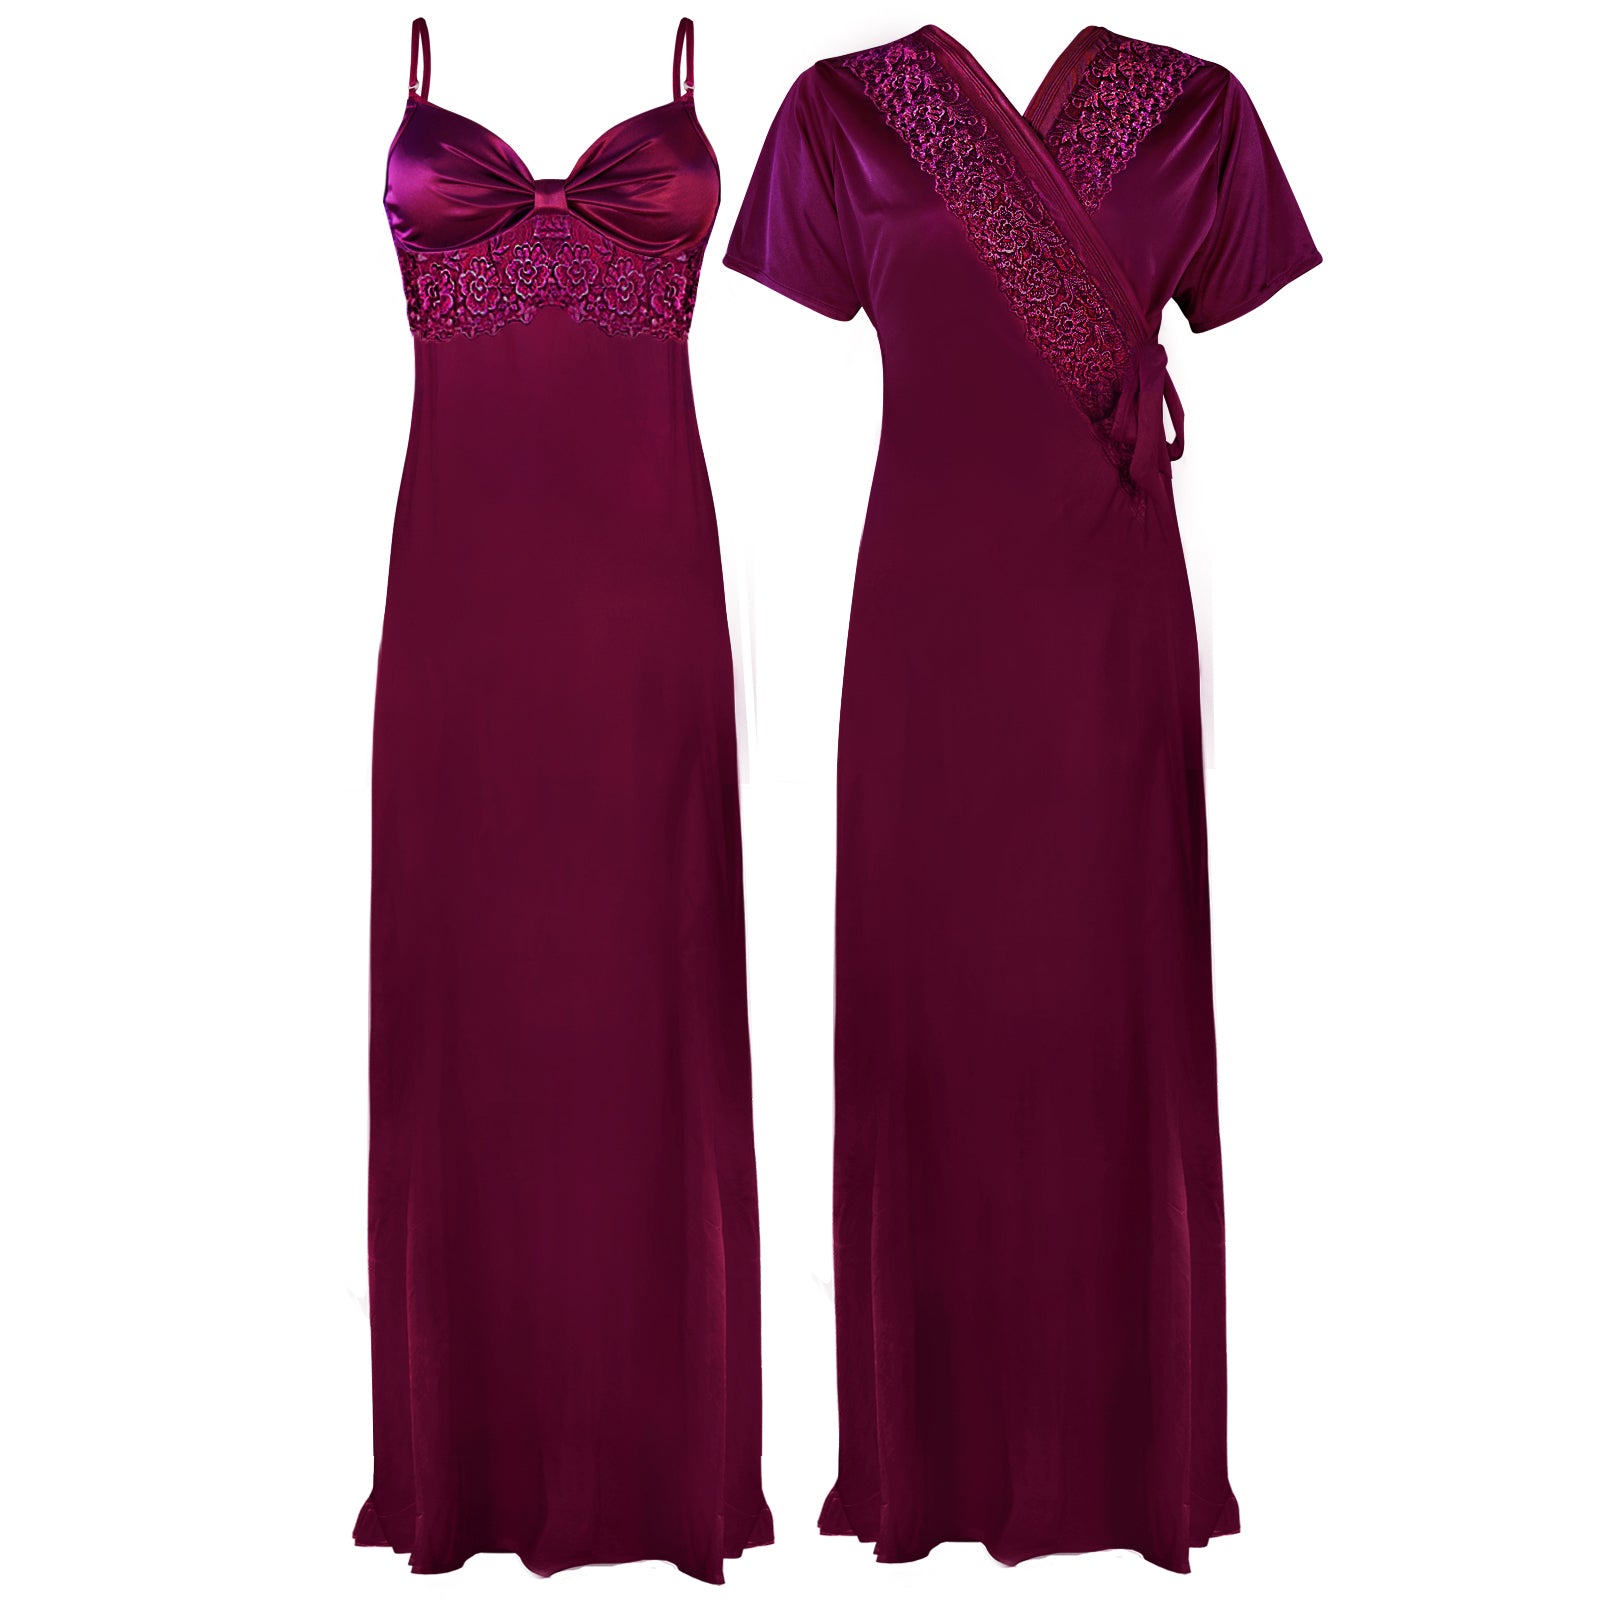 Dark Purple / One Size The Orange Tags Women Satin LACE Long Nightdress Ladies Nighty Chemise Embroidery Detailed The Orange Tags